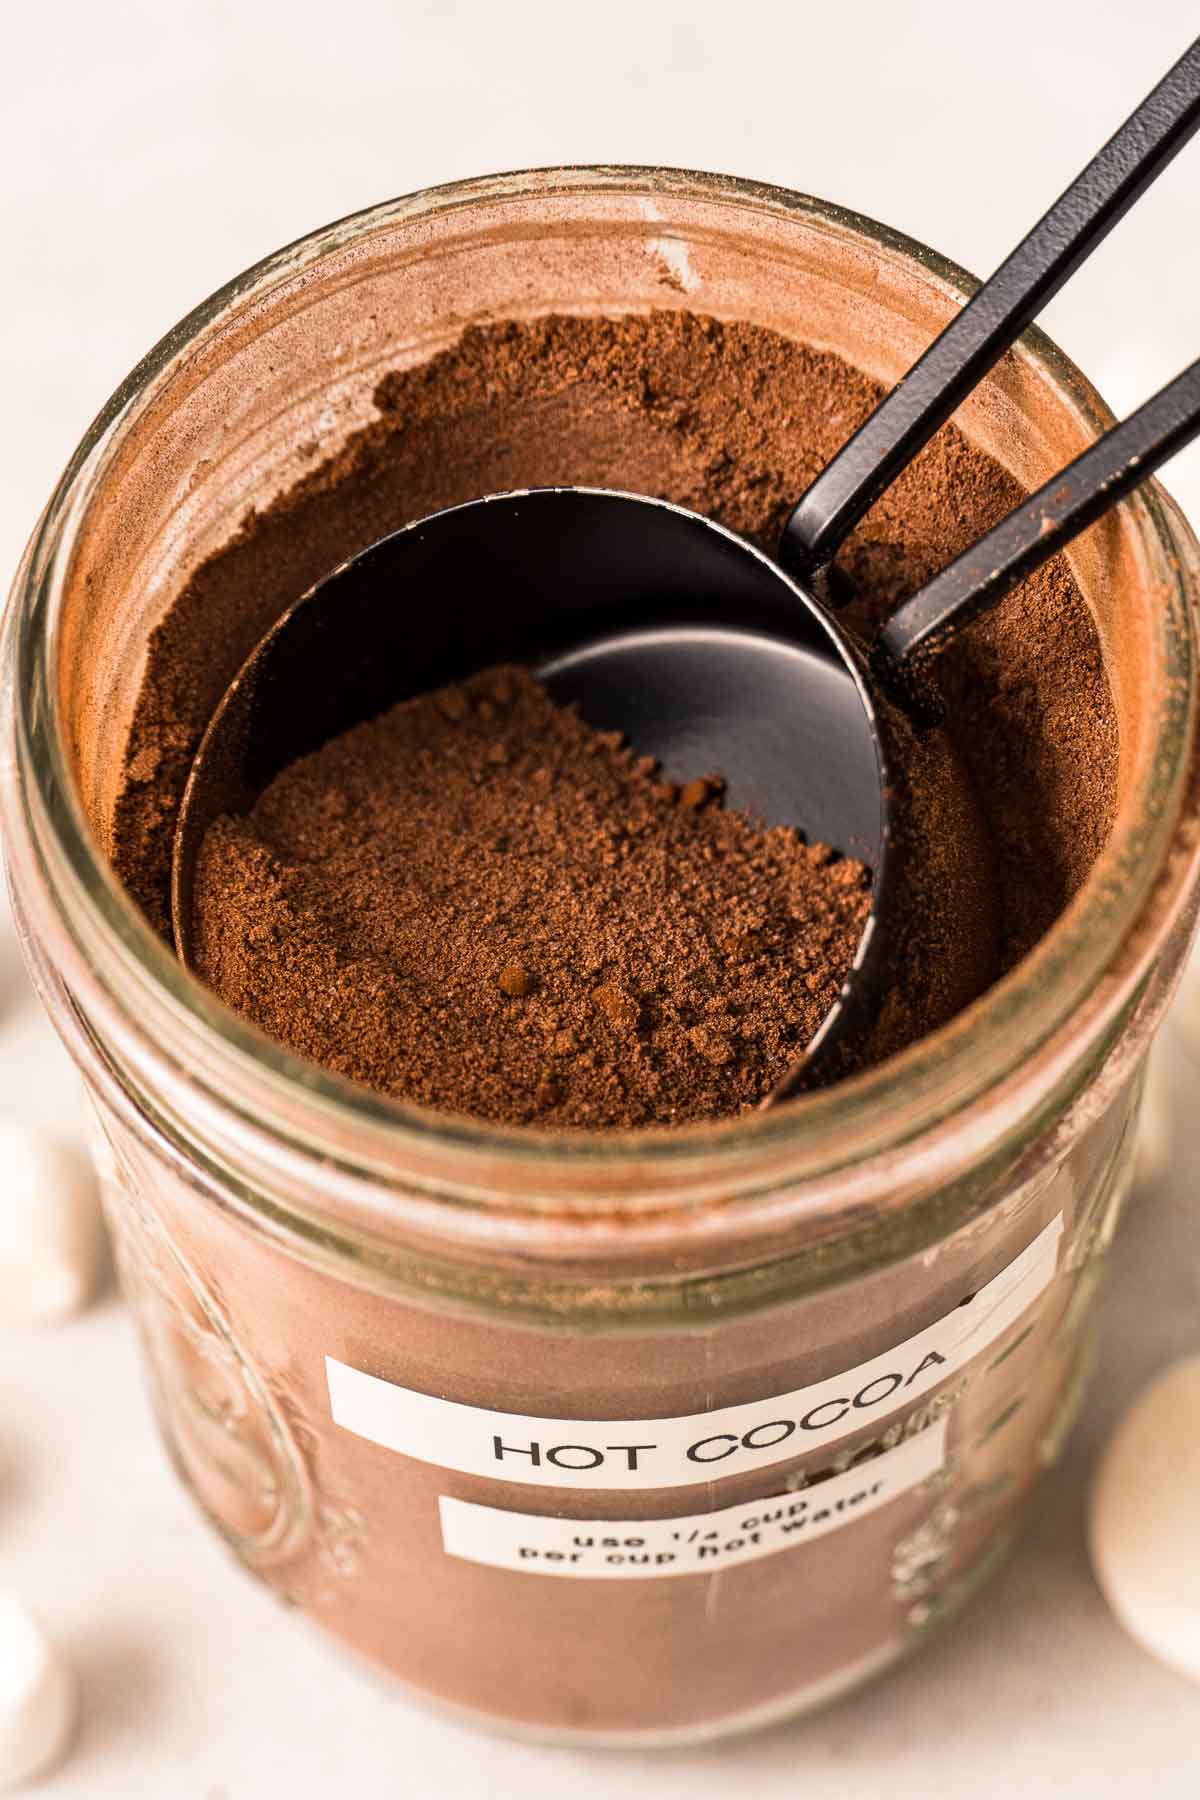 A top view of a mason jar full of hot cocoa mix with a ¼ cup measure scooping the mix out for homemade hot cocoa.